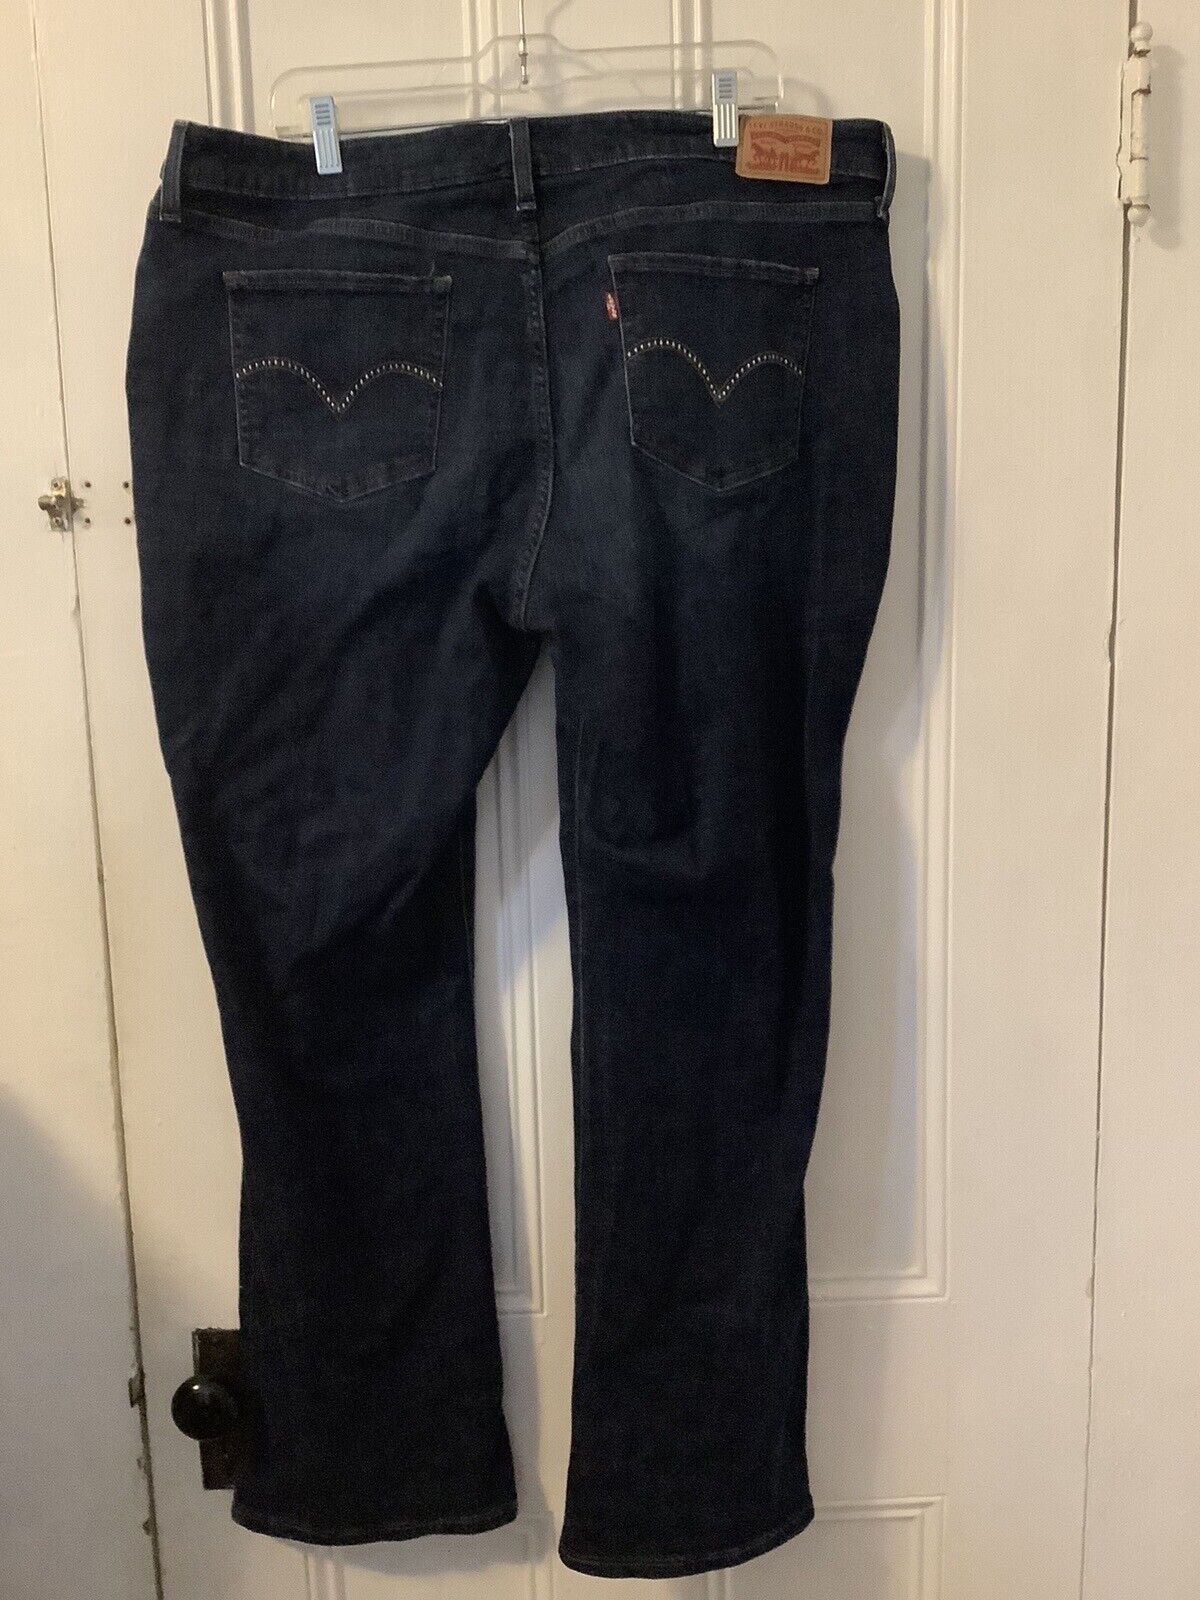 Levi’s 415 Classic Boot Cut Jeans Size 22W Waterless Blue 5F